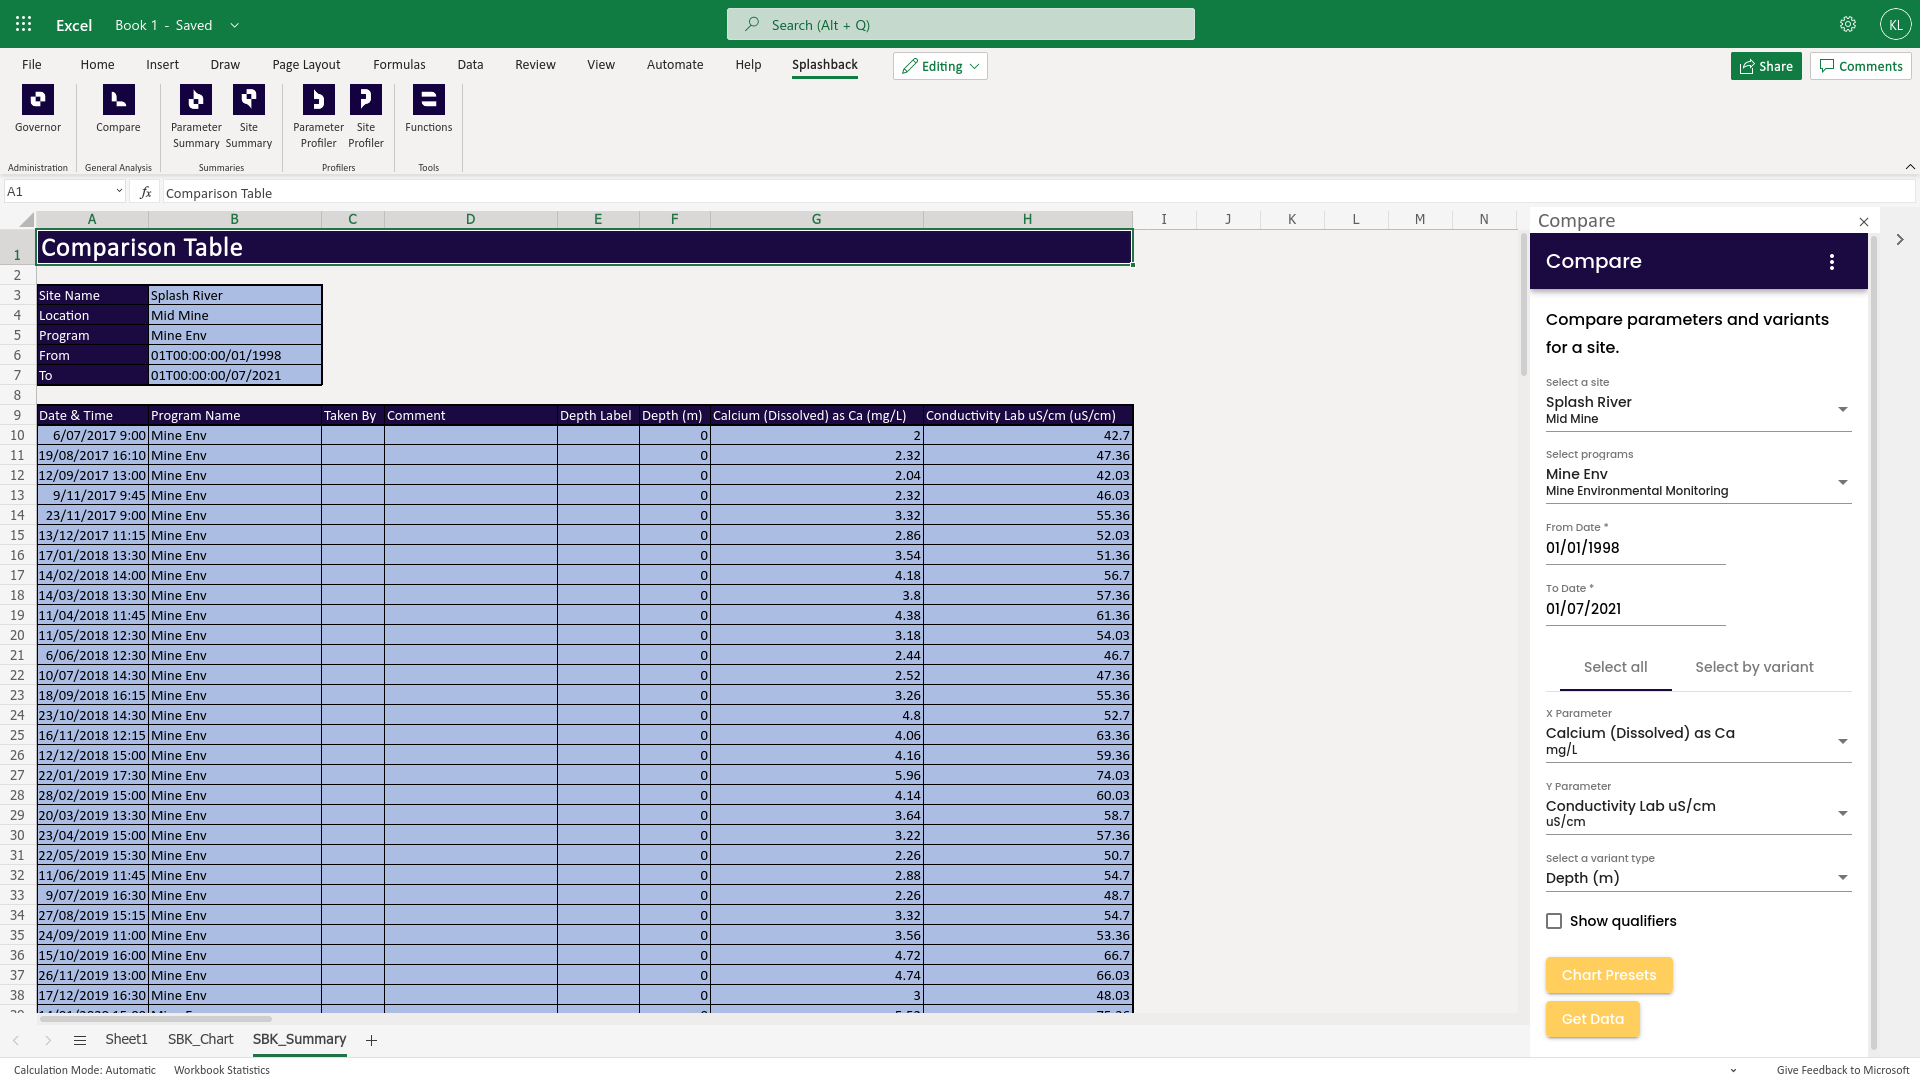 Splashback comparison of multiple parameters in a table using our Excel add-in.